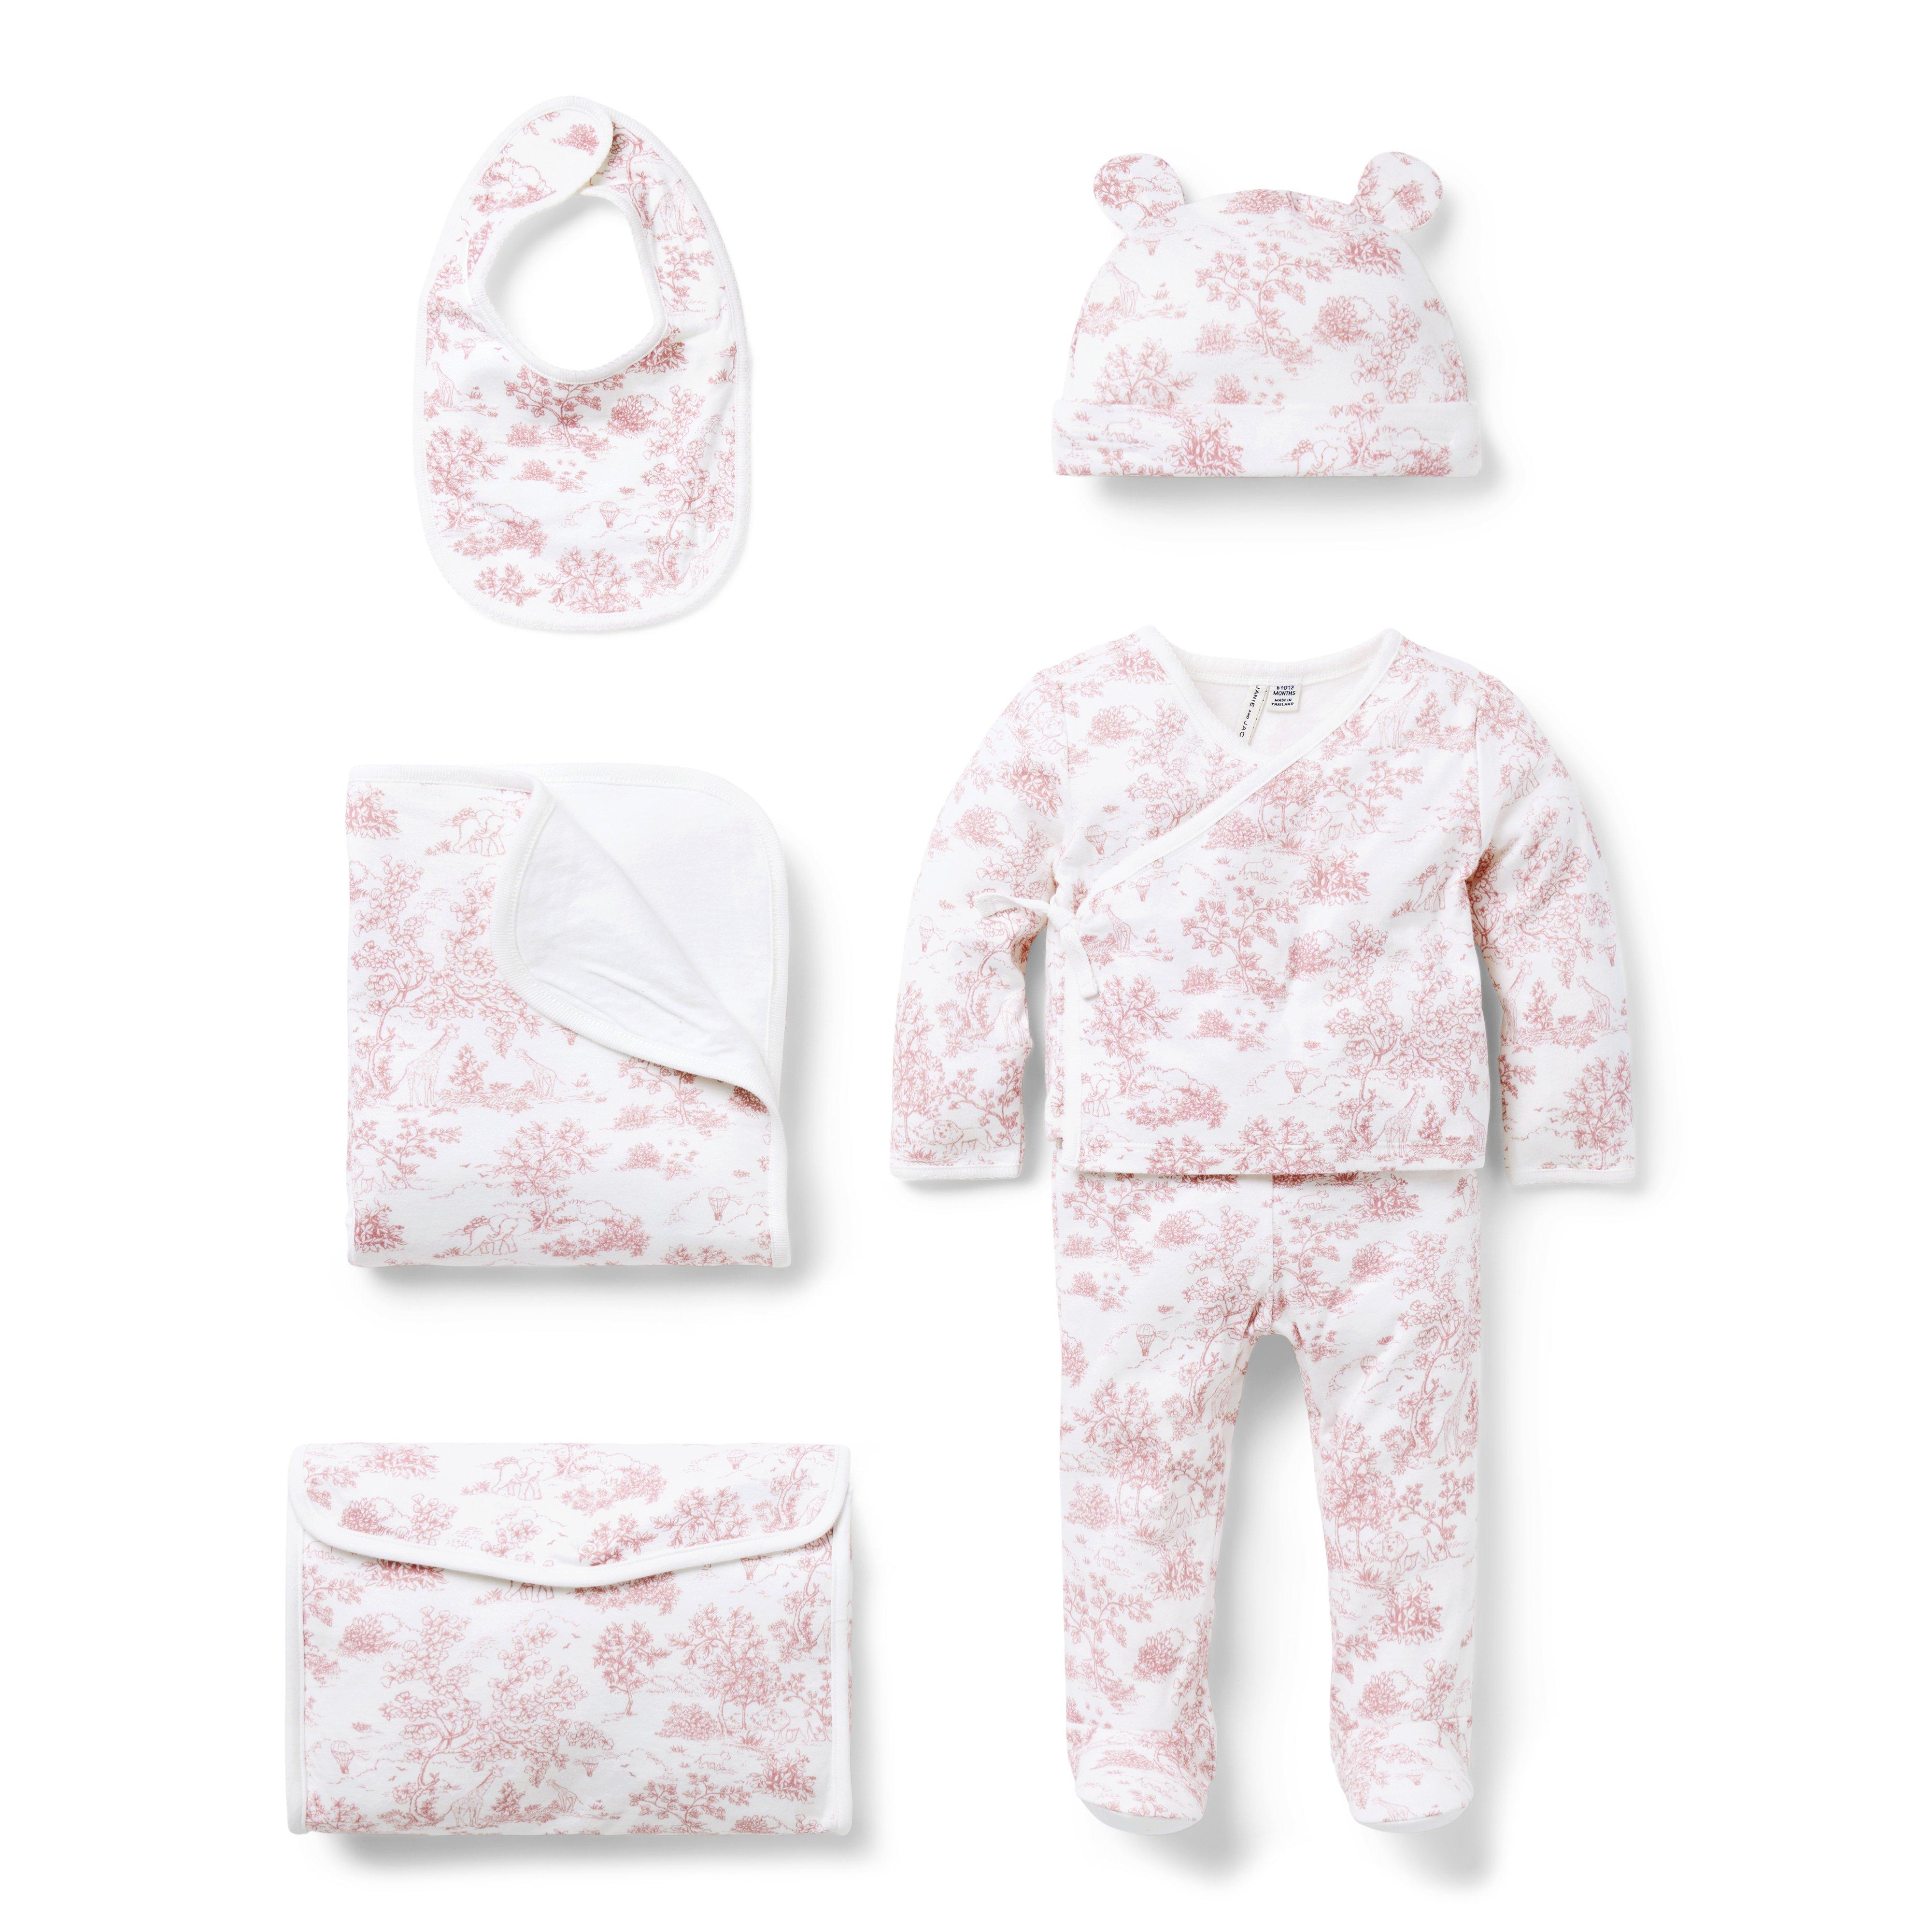 Newborn Baby Must-Haves & Clothing at Janie and Jack